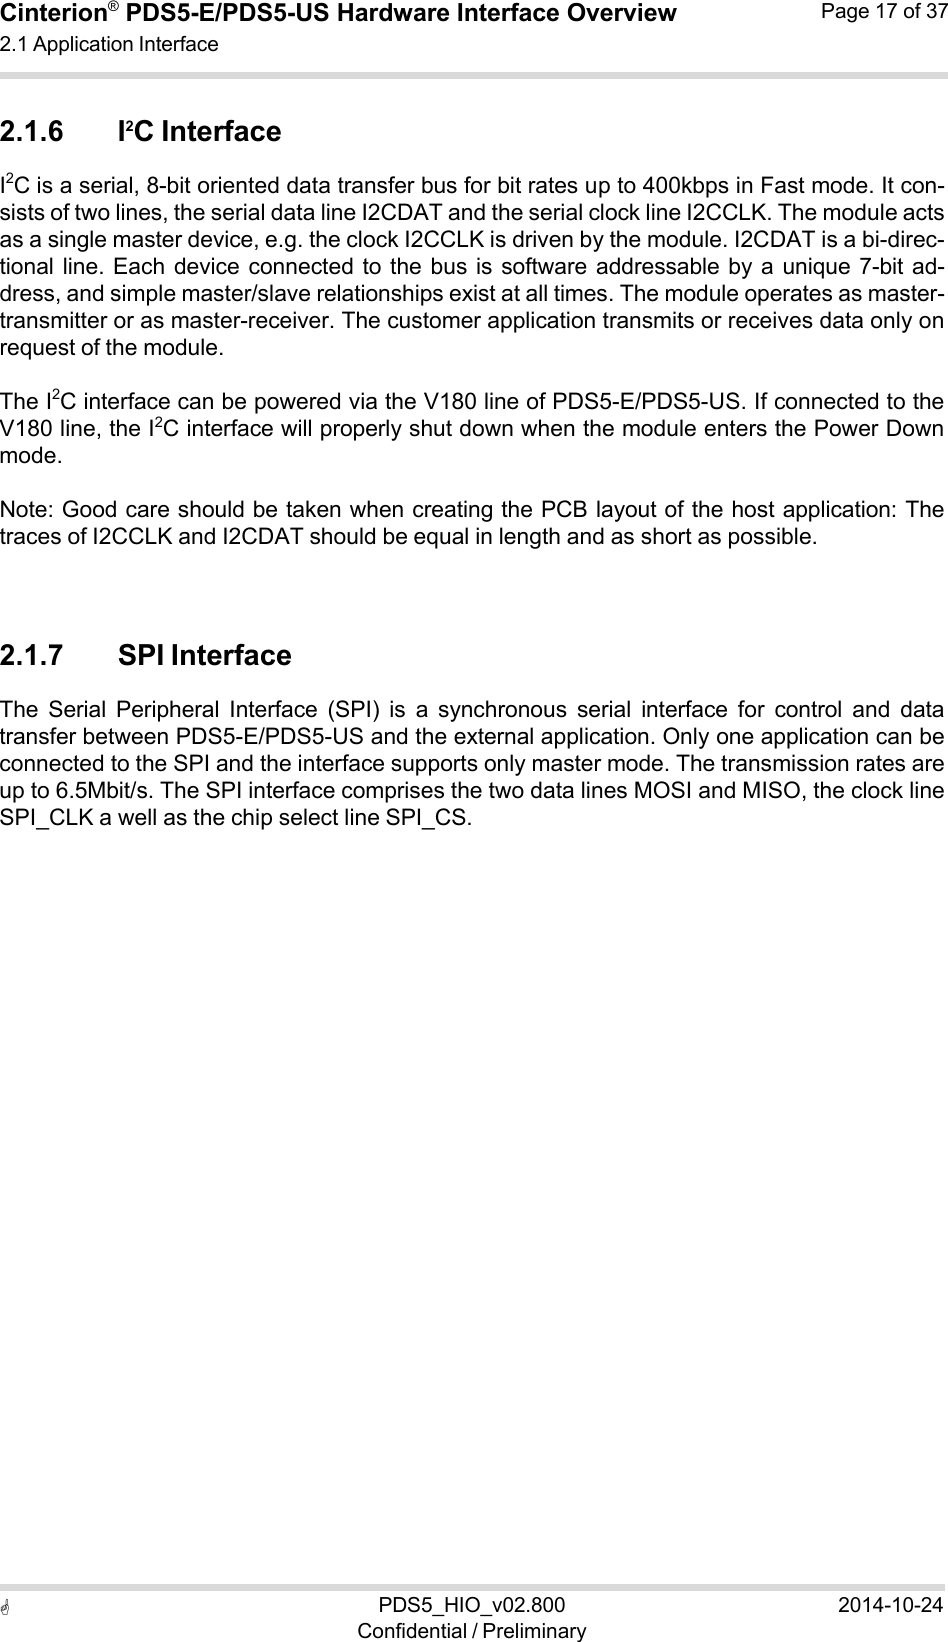  PDS5_HIO_v02.800Confidential / Preliminary2014-10-24Cinterion®  PDS5-E/PDS5-US Hardware Interface Overview2.1 Application Interface Page 17 of 37   2.1.6 I2C Interface I2C is a serial, 8-bit oriented data transfer bus for bit rates up to 400kbps in Fast mode. It con- sists of two lines, the serial data line I2CDAT and the serial clock line I2CCLK. The module acts as a single master device, e.g. the clock I2CCLK is driven by the module. I2CDAT is a bi-direc- tional line. Each  device connected to the  bus is  software addressable by  a unique  7-bit ad- dress, and simple master/slave relationships exist at all times. The module operates as master- transmitter or as master-receiver. The customer application transmits or receives data only on request of the module.  The I2C interface can be powered via the V180 line of PDS5-E/PDS5-US. If connected to the V180 line, the I2C interface will properly shut down when the module enters the Power Down mode.  Note: Good care should be taken when creating the PCB layout of the host application: The traces of I2CCLK and I2CDAT should be equal in length and as short as possible.    2.1.7 SPI Interface The  Serial  Peripheral  Interface  (SPI)  is  a  synchronous  serial  interface  for  control  and  data transfer between PDS5-E/PDS5-US and the external application. Only one application can be connected to the SPI and the interface supports only master mode. The transmission rates are up to 6.5Mbit/s. The SPI interface comprises the two data lines MOSI and MISO, the clock line SPI_CLK a well as the chip select line SPI_CS. 